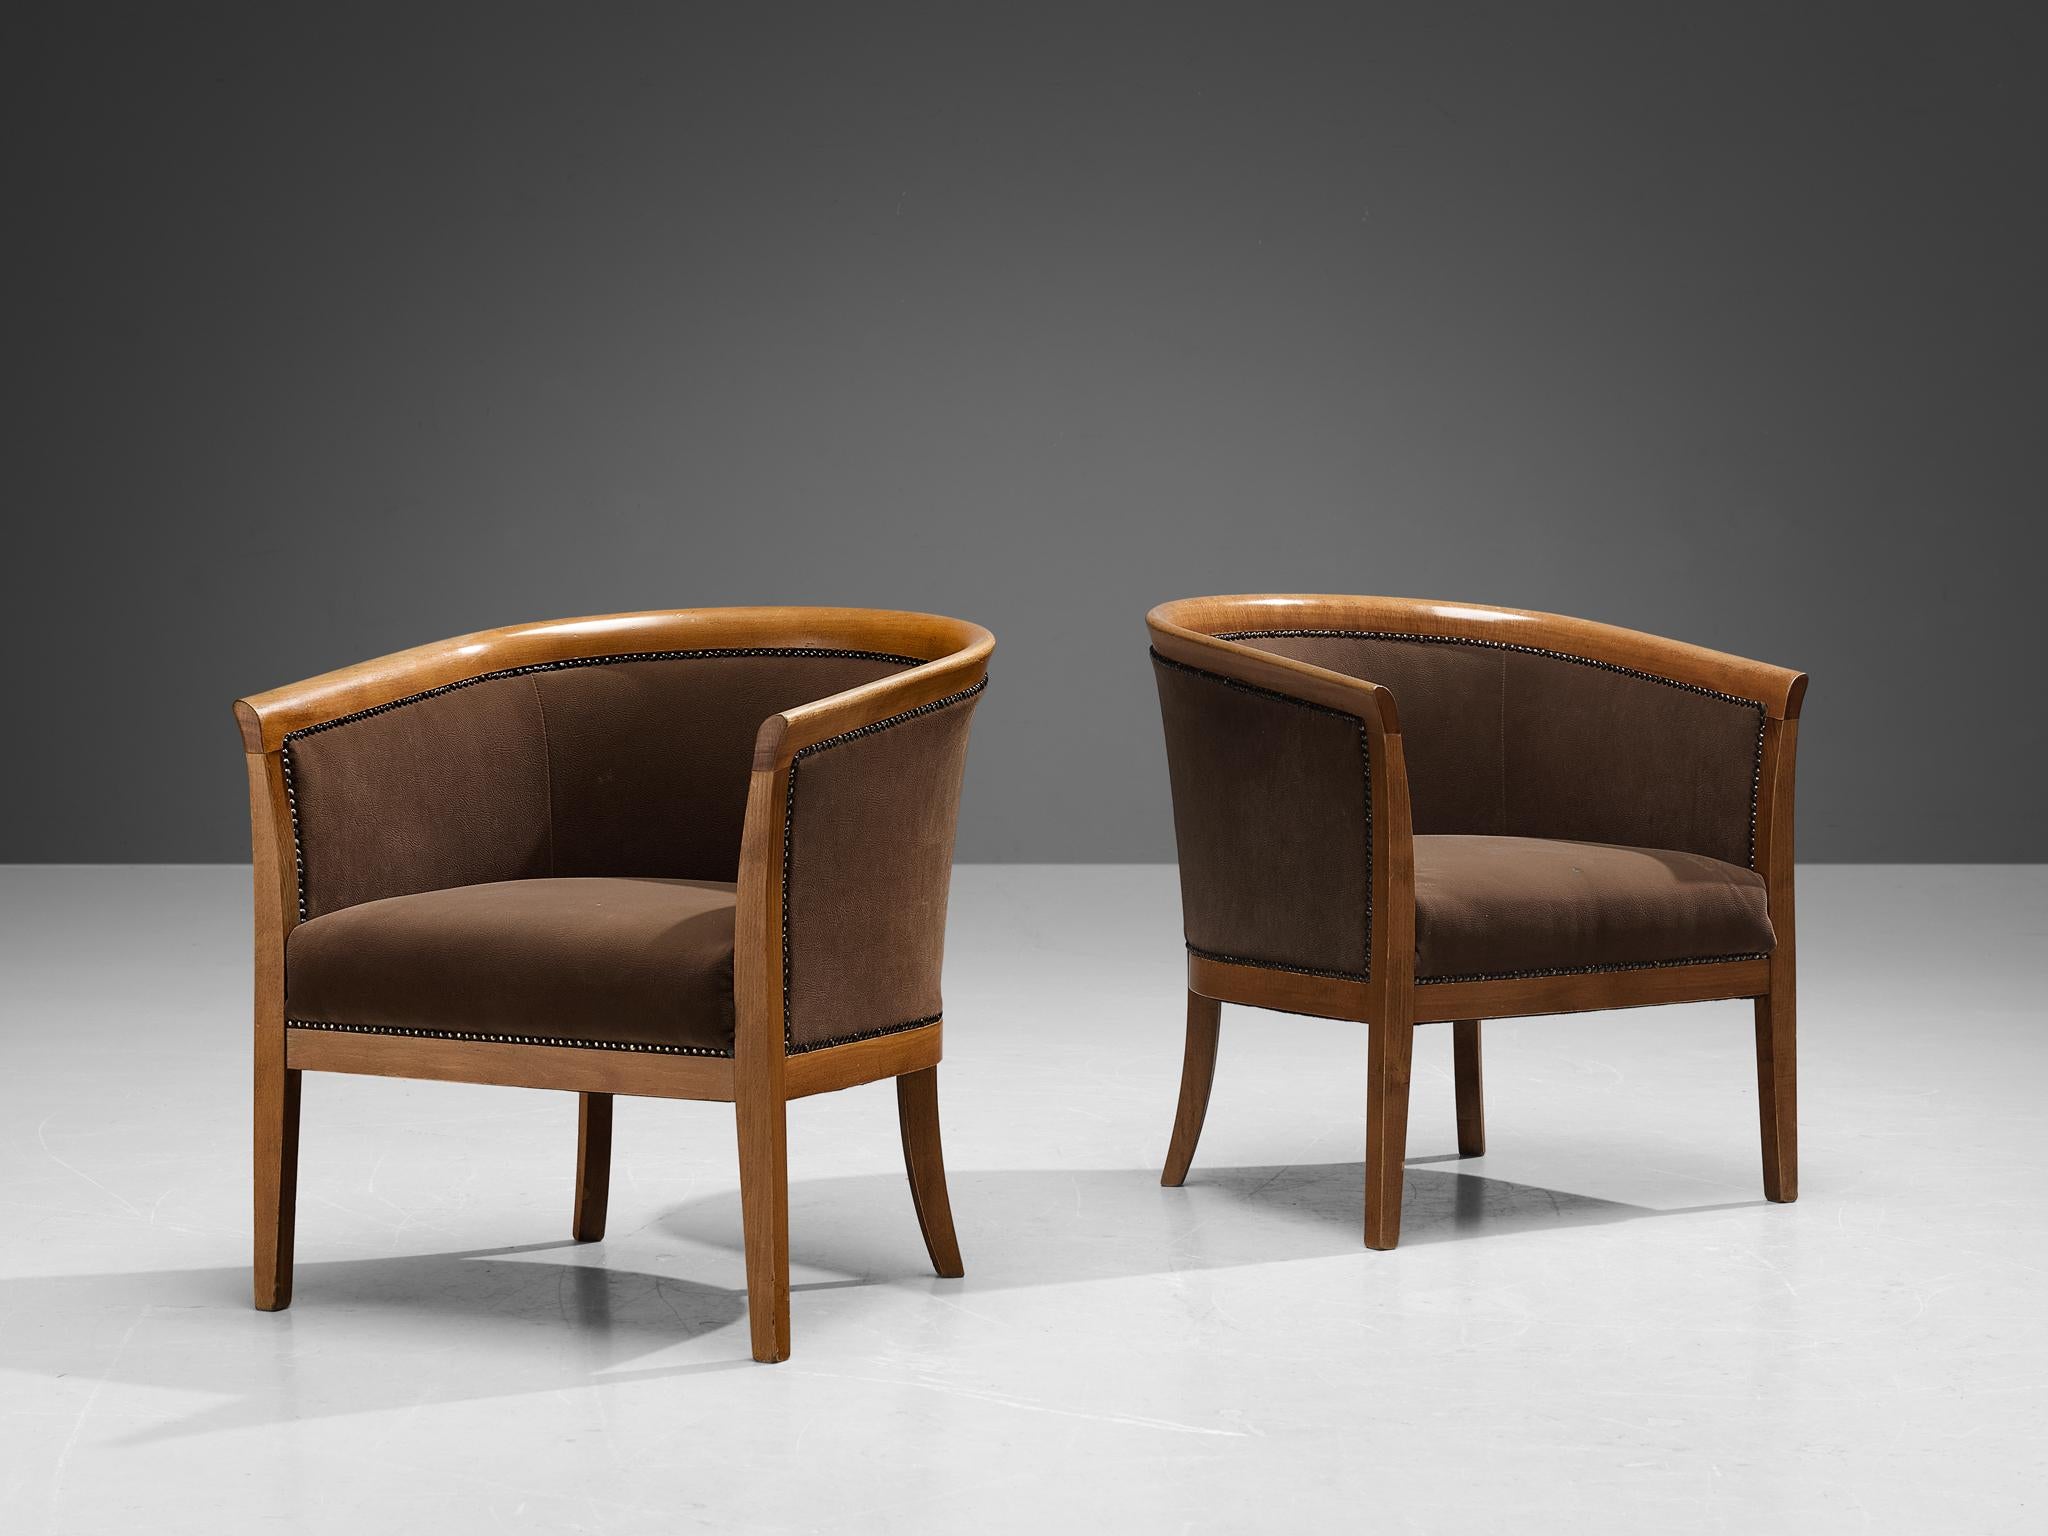 Pair of club chairs, brown fabric, beech, brass, France, 1940s.

These classically sculpted armchairs feature seatings that are designed as a shell, which embraces the sitter wonderfully. The curvaceous lines of the frame are further emphasized by